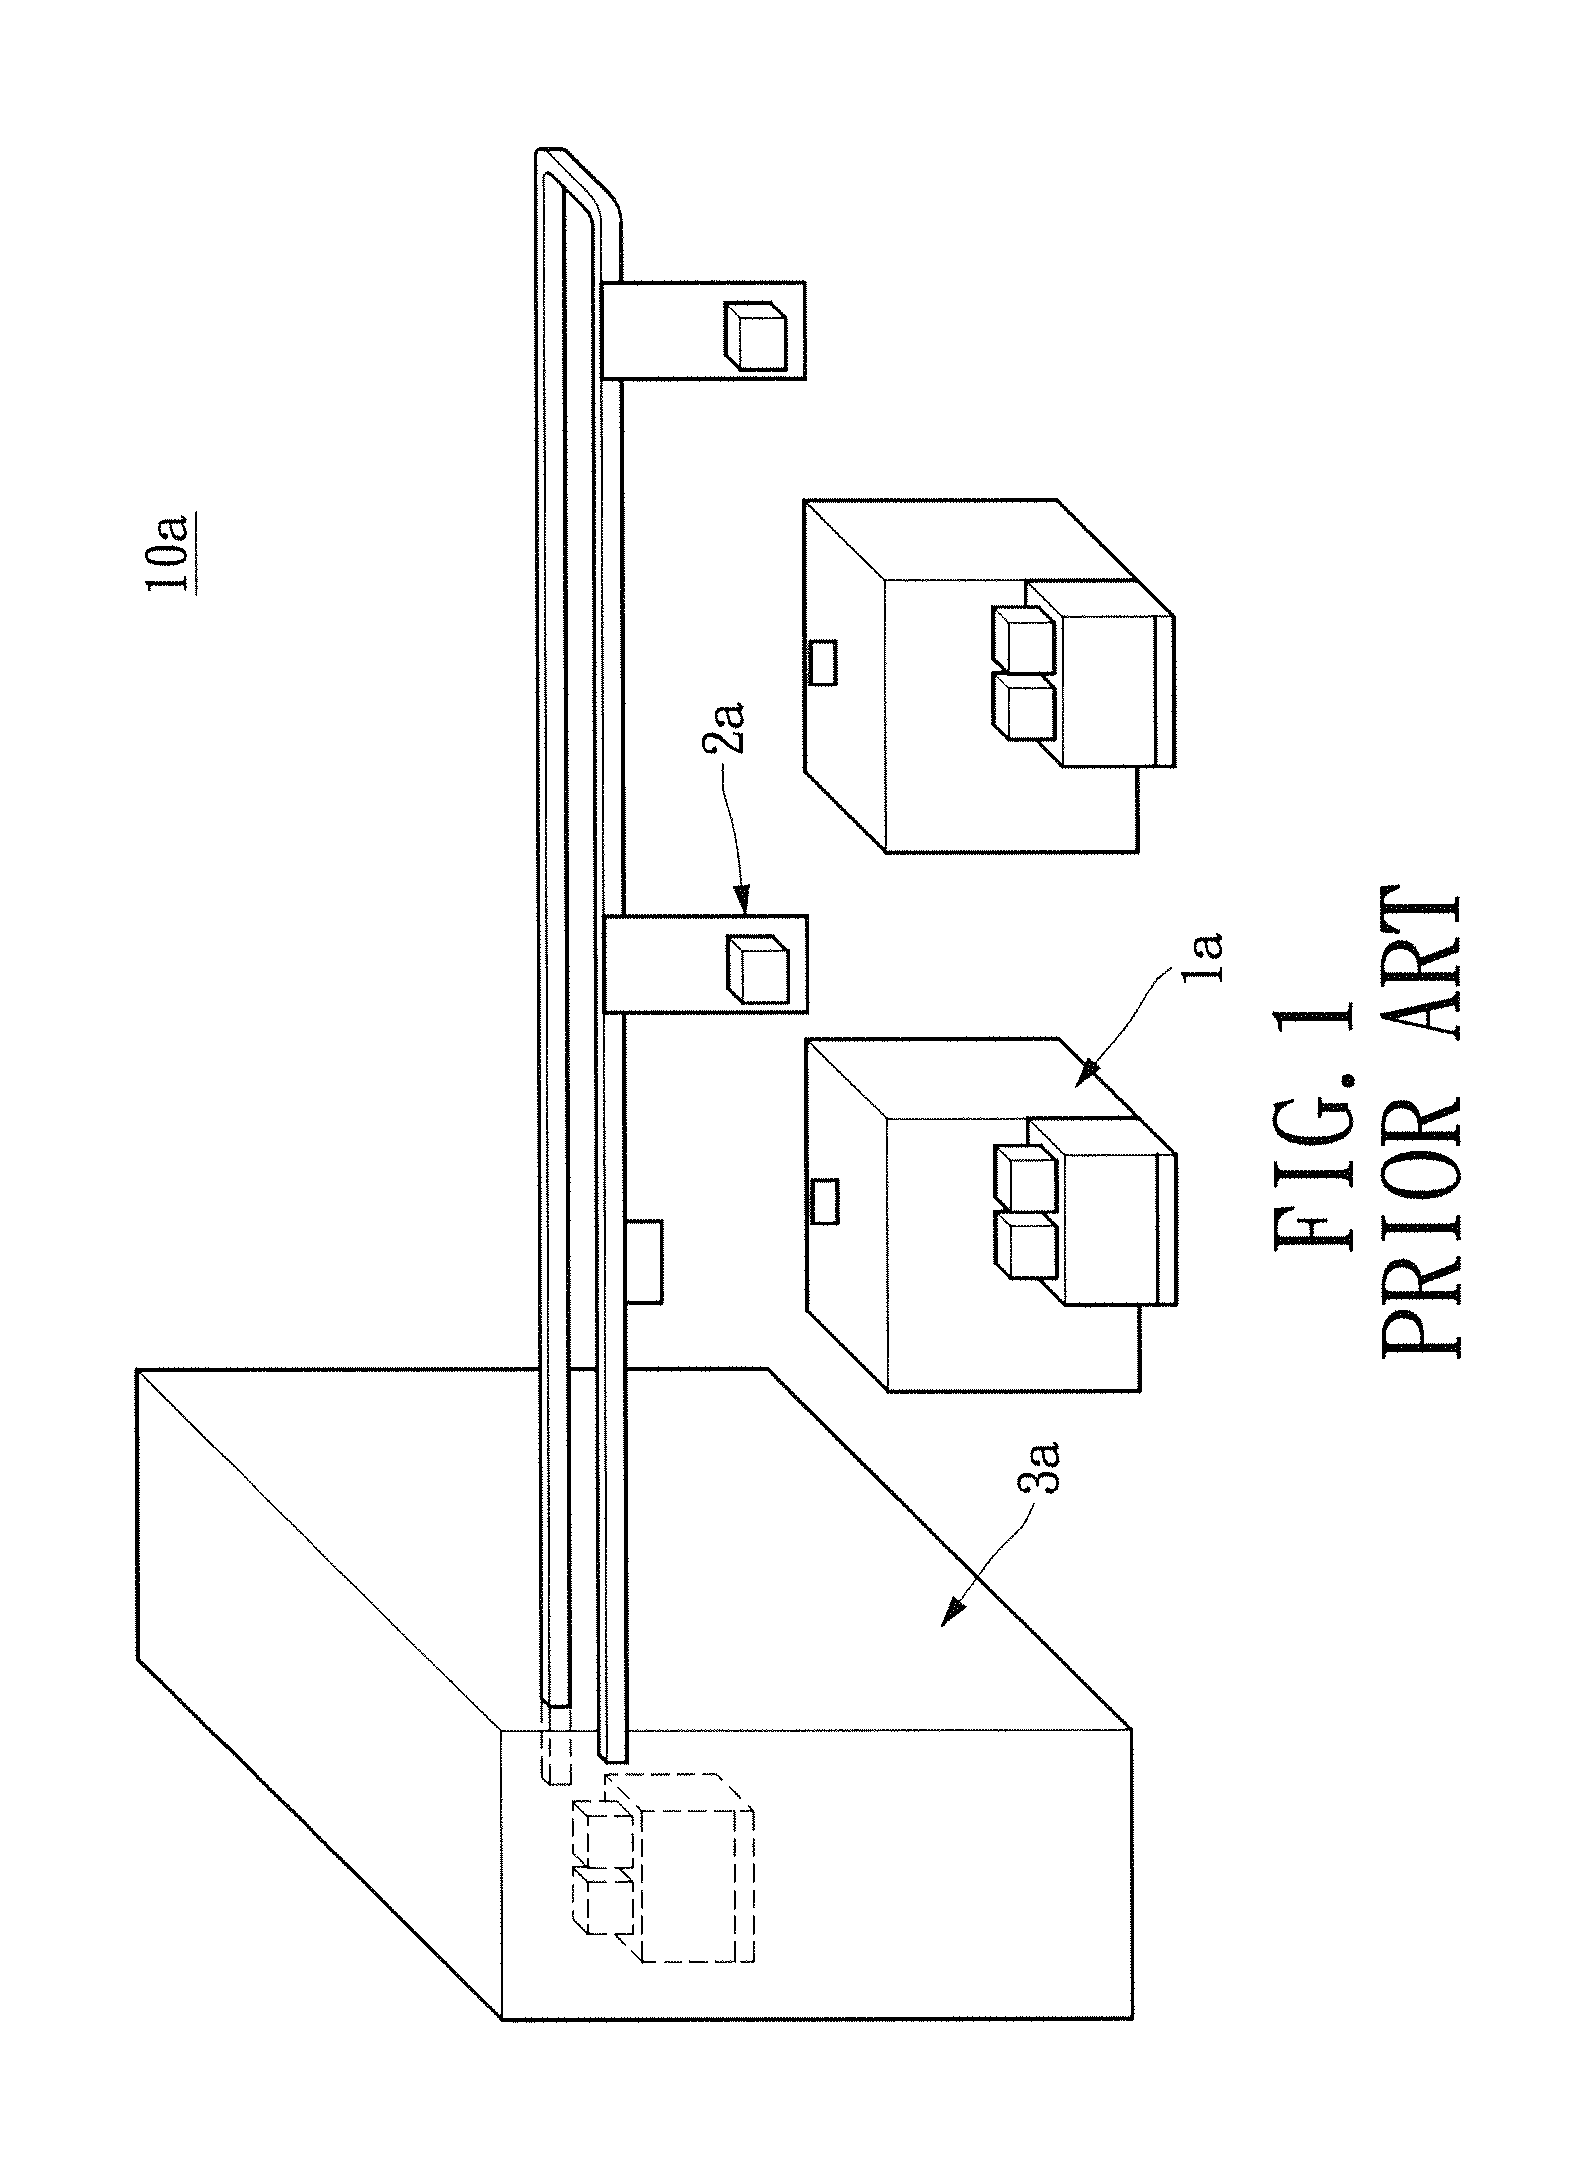 Overhead buffer device and wafer transport system